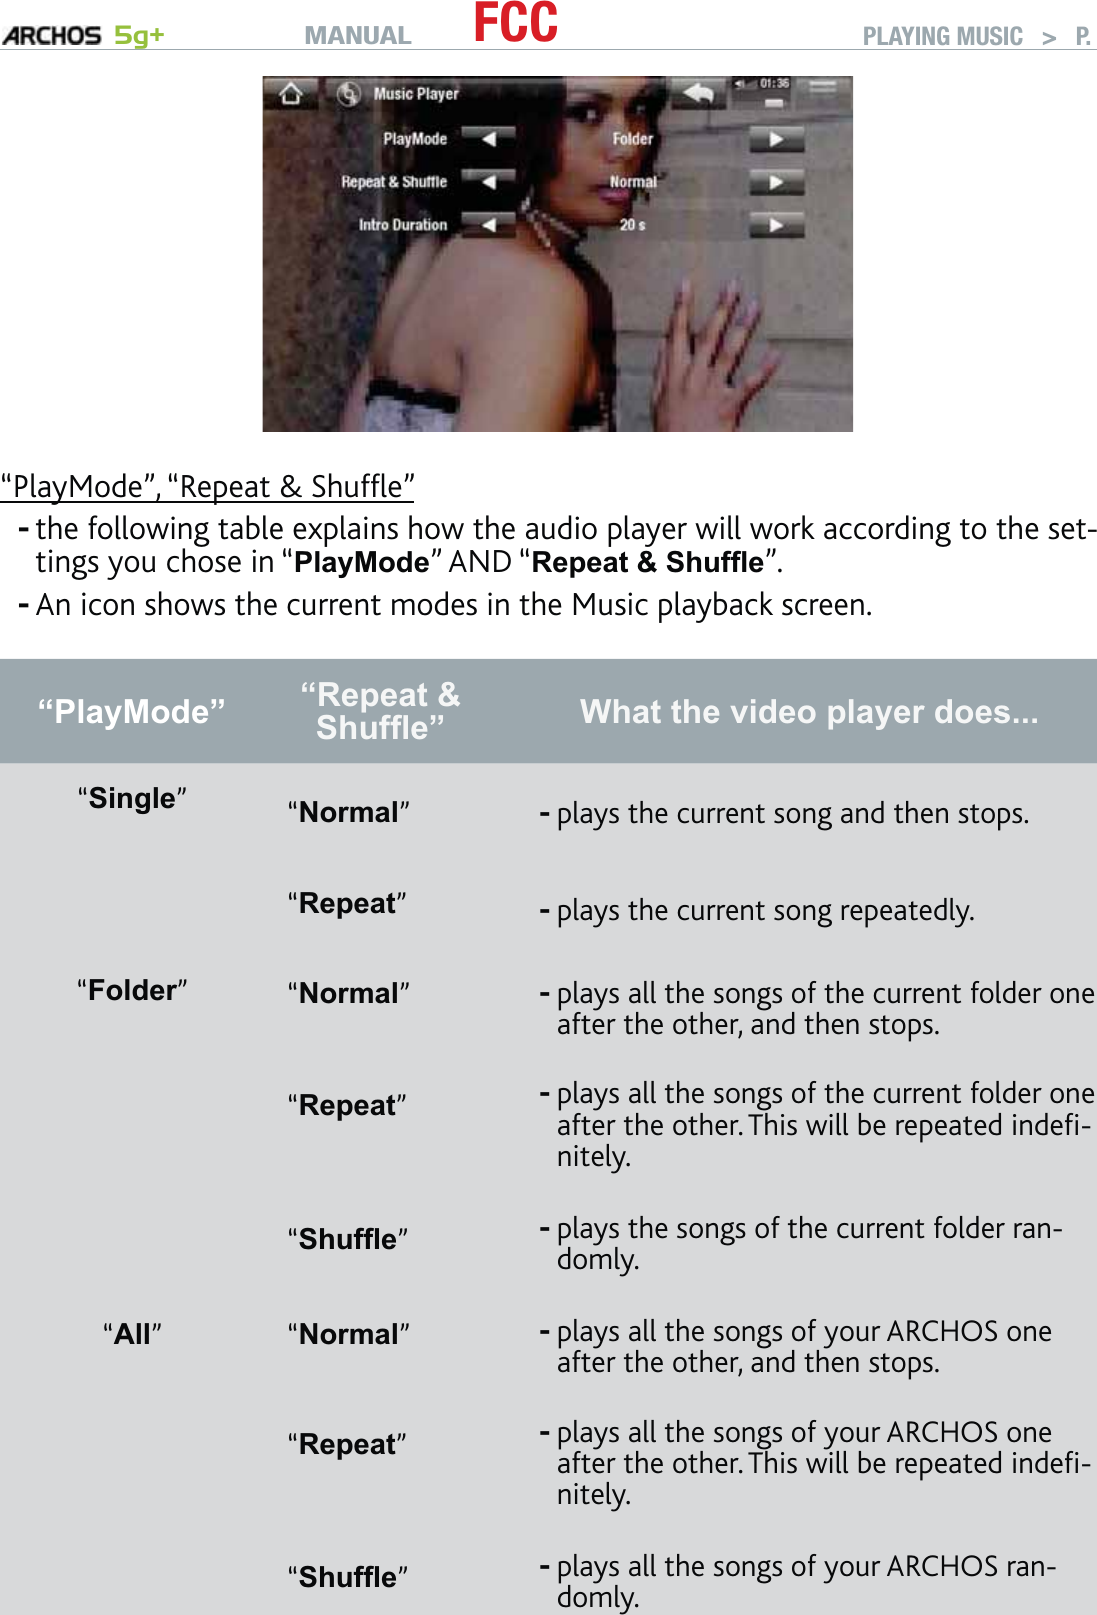 MANUAL 5g+ FCC PLAYING MUSIC   &gt;   P. 18“PlayMode”, “Repeat &amp; Shufﬂe”the following table explains how the audio player will work according to the set-tings you chose in “PlayMode” AND “Repeat &amp; Shufﬂe”. An icon shows the current modes in the Music playback screen.“PlayMode” “Repeat &amp; Shufﬂe” What the video player does...“Single”“Normal”plays the current song and then stops.-“Repeat”plays the current song repeatedly.-“Folder”“Normal” plays all the songs of the current folder one after the other, and then stops.-“Repeat”plays all the songs of the current folder one after the other. This will be repeated indeﬁ-nitely.-“Shufﬂe”plays the songs of the current folder ran-domly.-“All”“Normal”plays all the songs of your ARCHOS one after the other, and then stops.-“Repeat”plays all the songs of your ARCHOS one after the other. This will be repeated indeﬁ-nitely.-“Shufﬂe”plays all the songs of your ARCHOS ran-domly.---